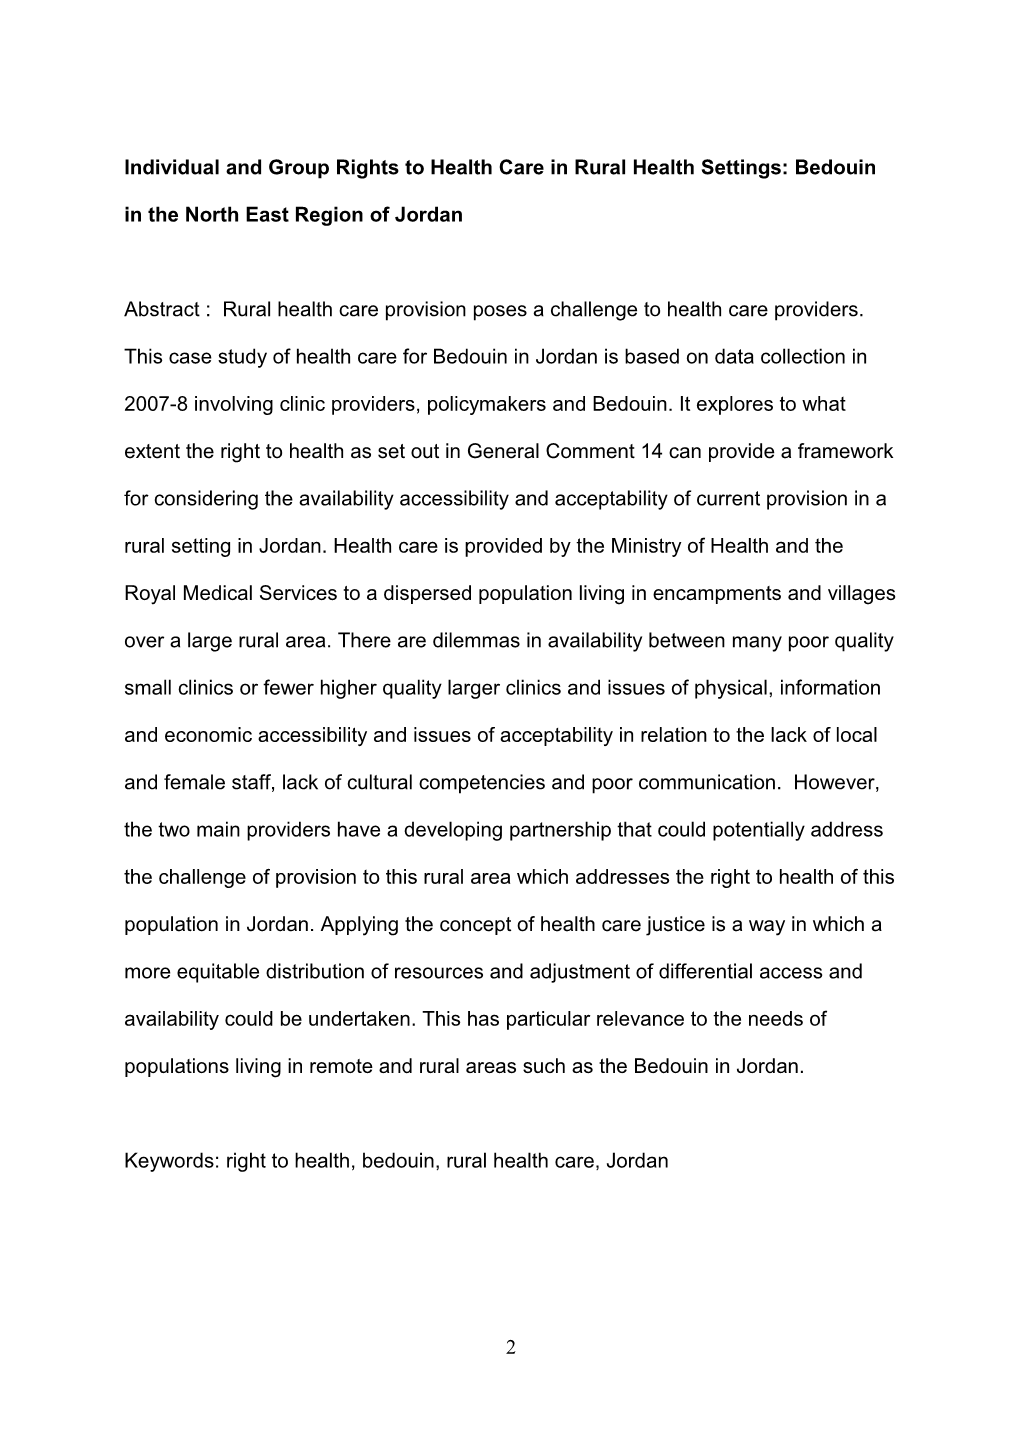 Problematizing Individual and Group Rights to Available and Accessible Health Care in A